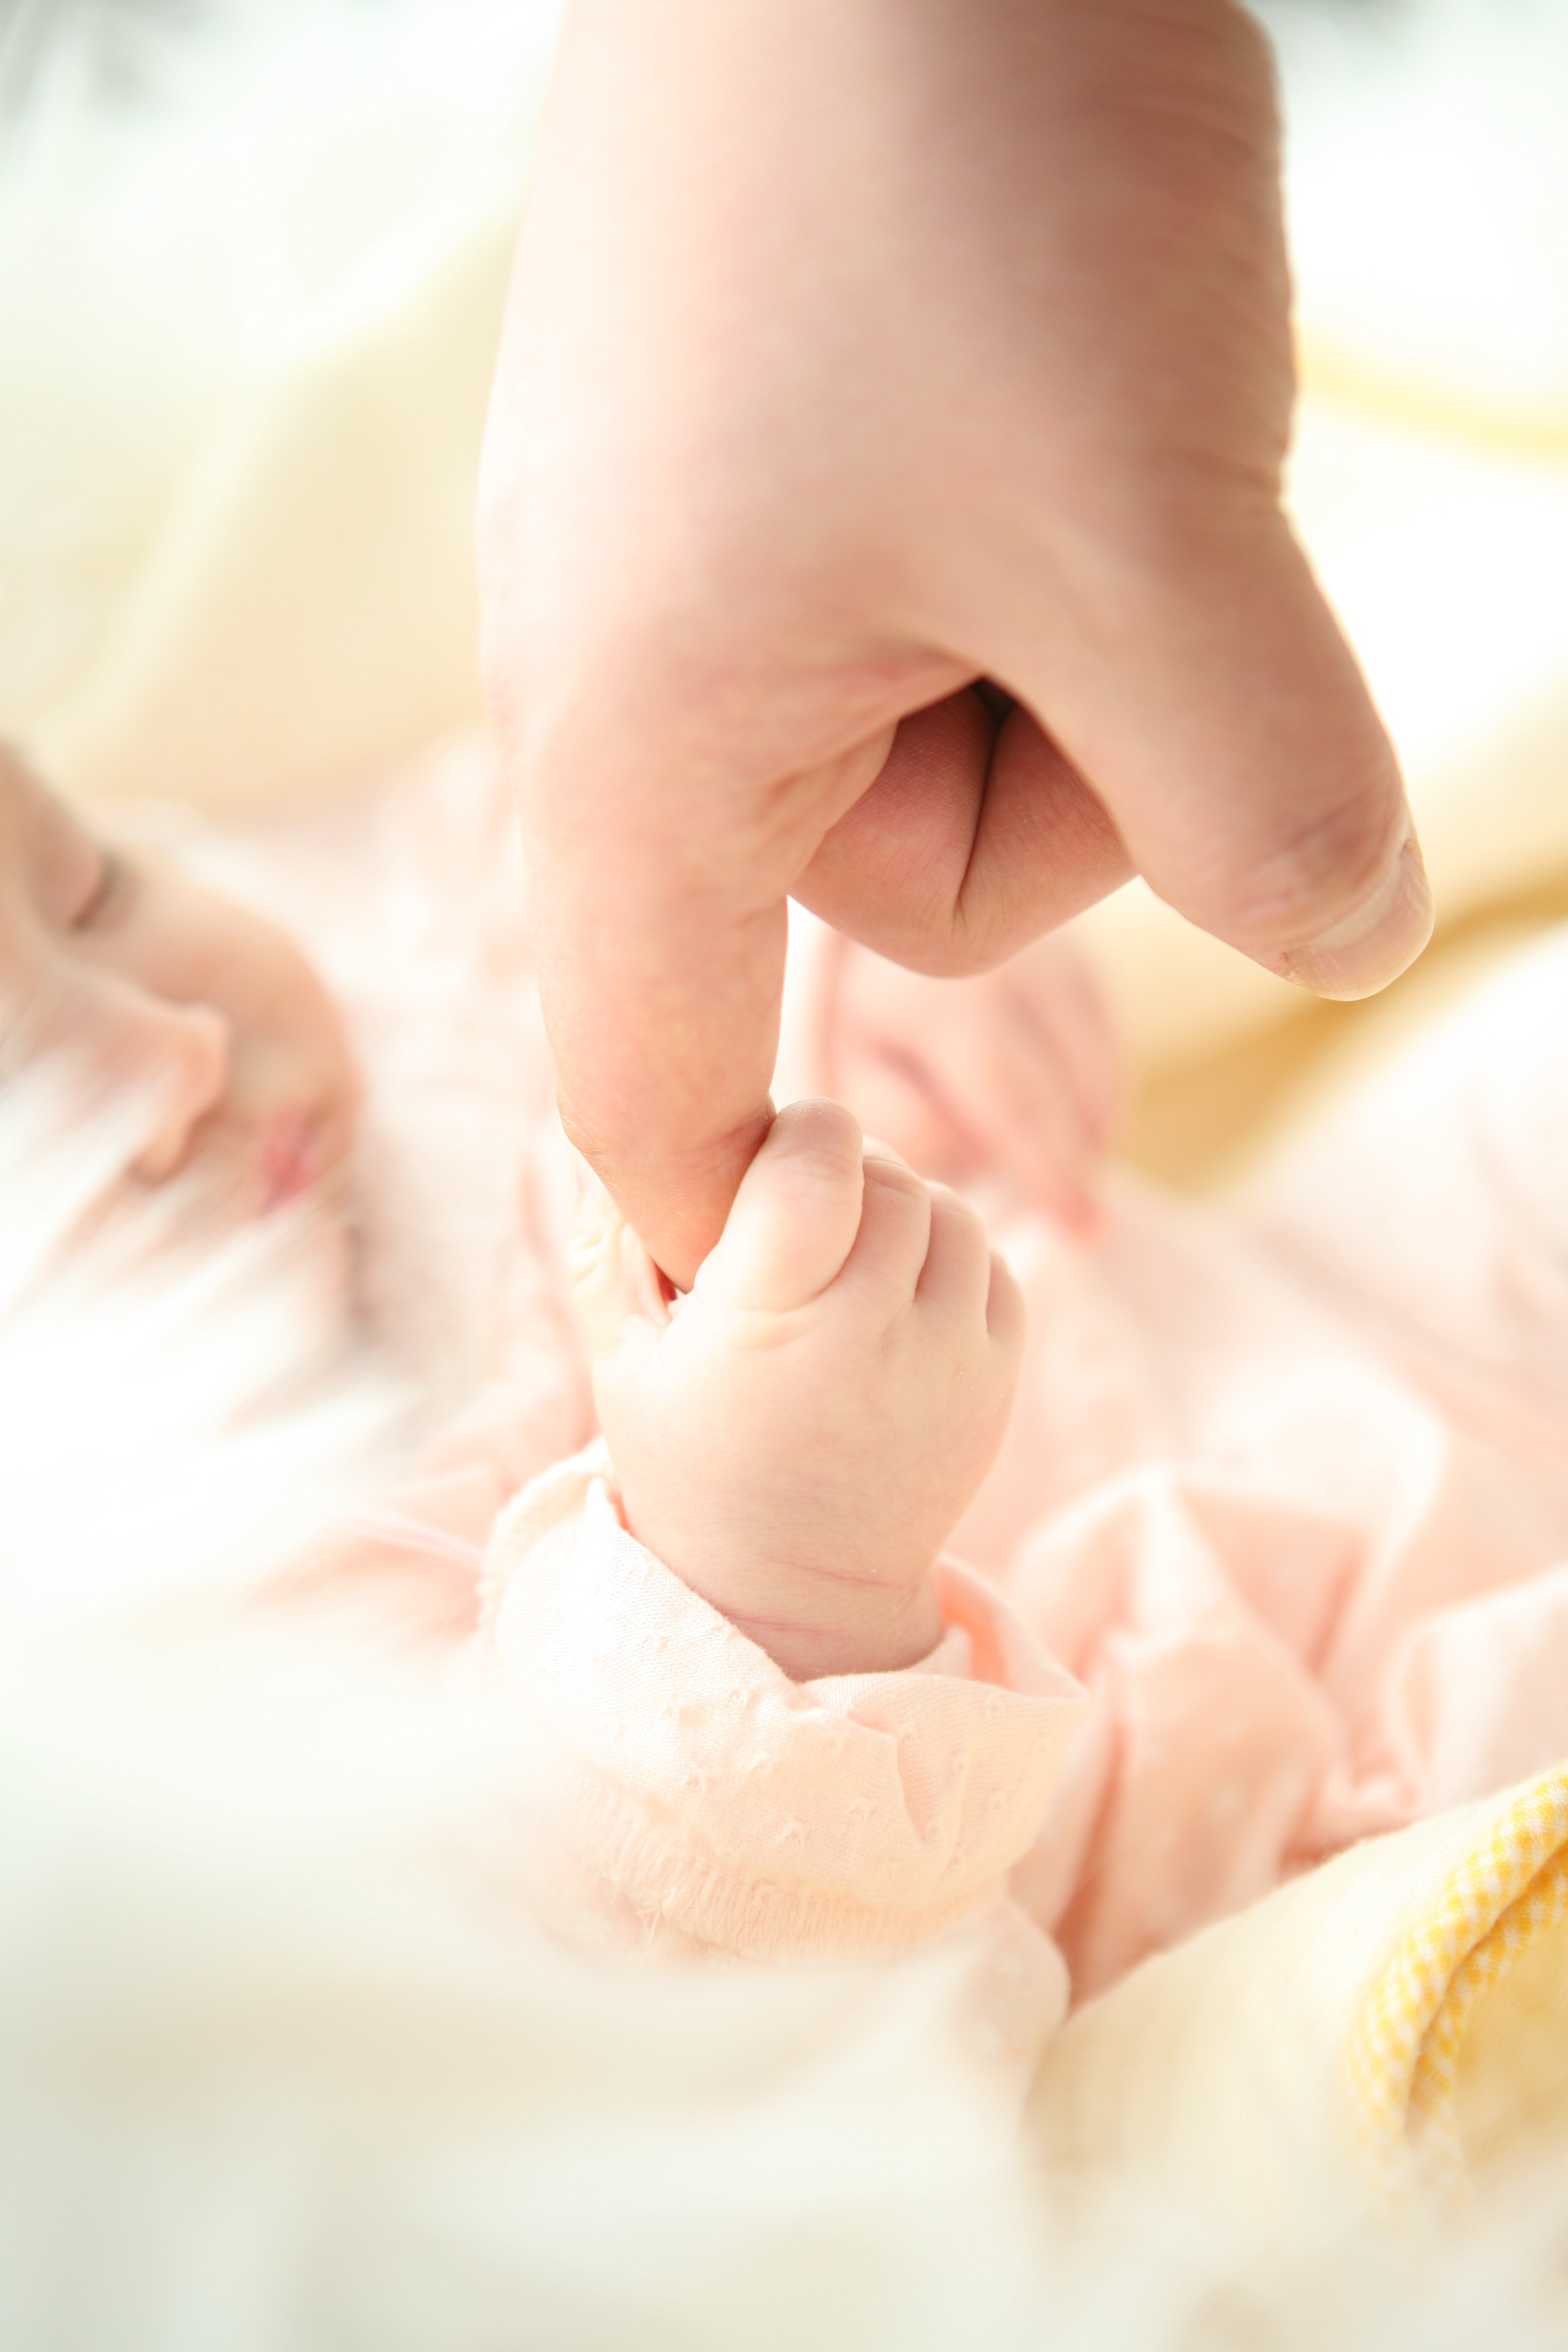 Baby holding a person's finger | Source: Pexels